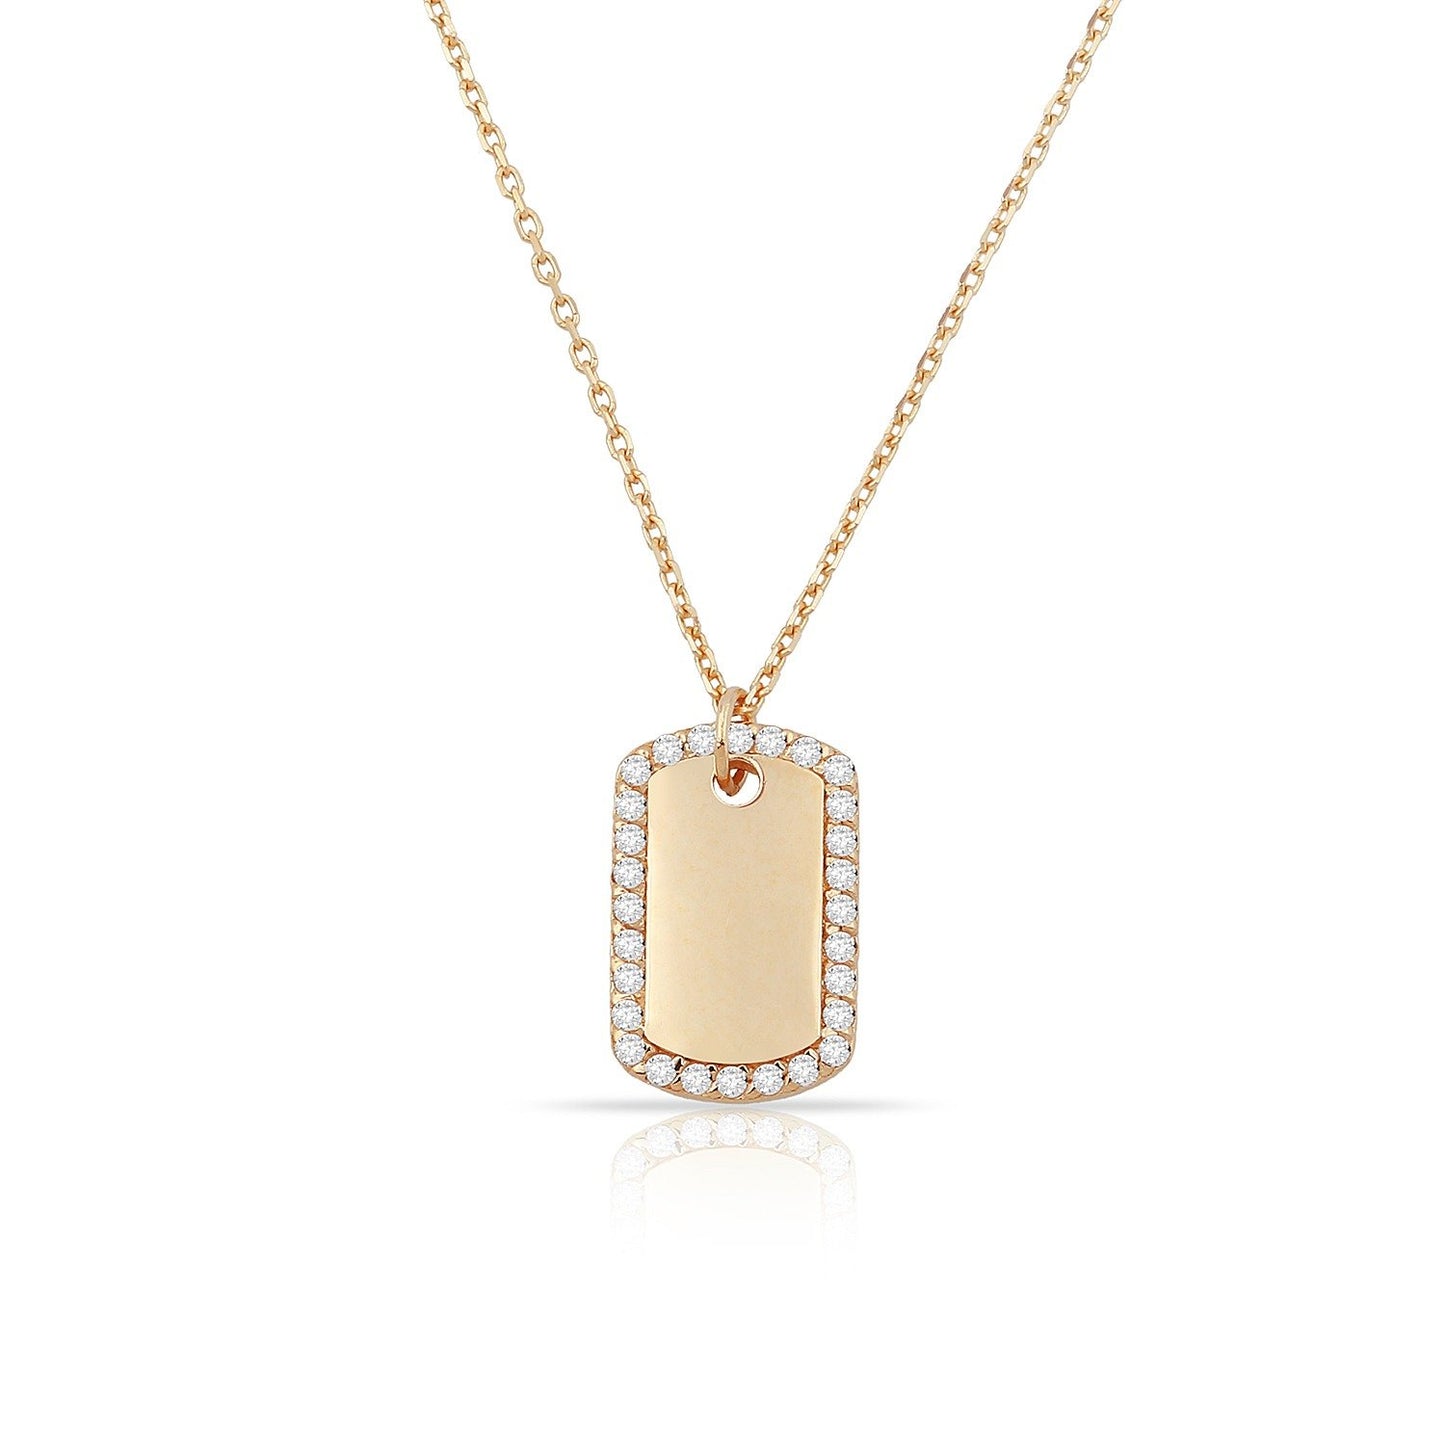 TSK Diamond Tag Necklace JEWELRY The Sis Kiss 14k Rose Gold